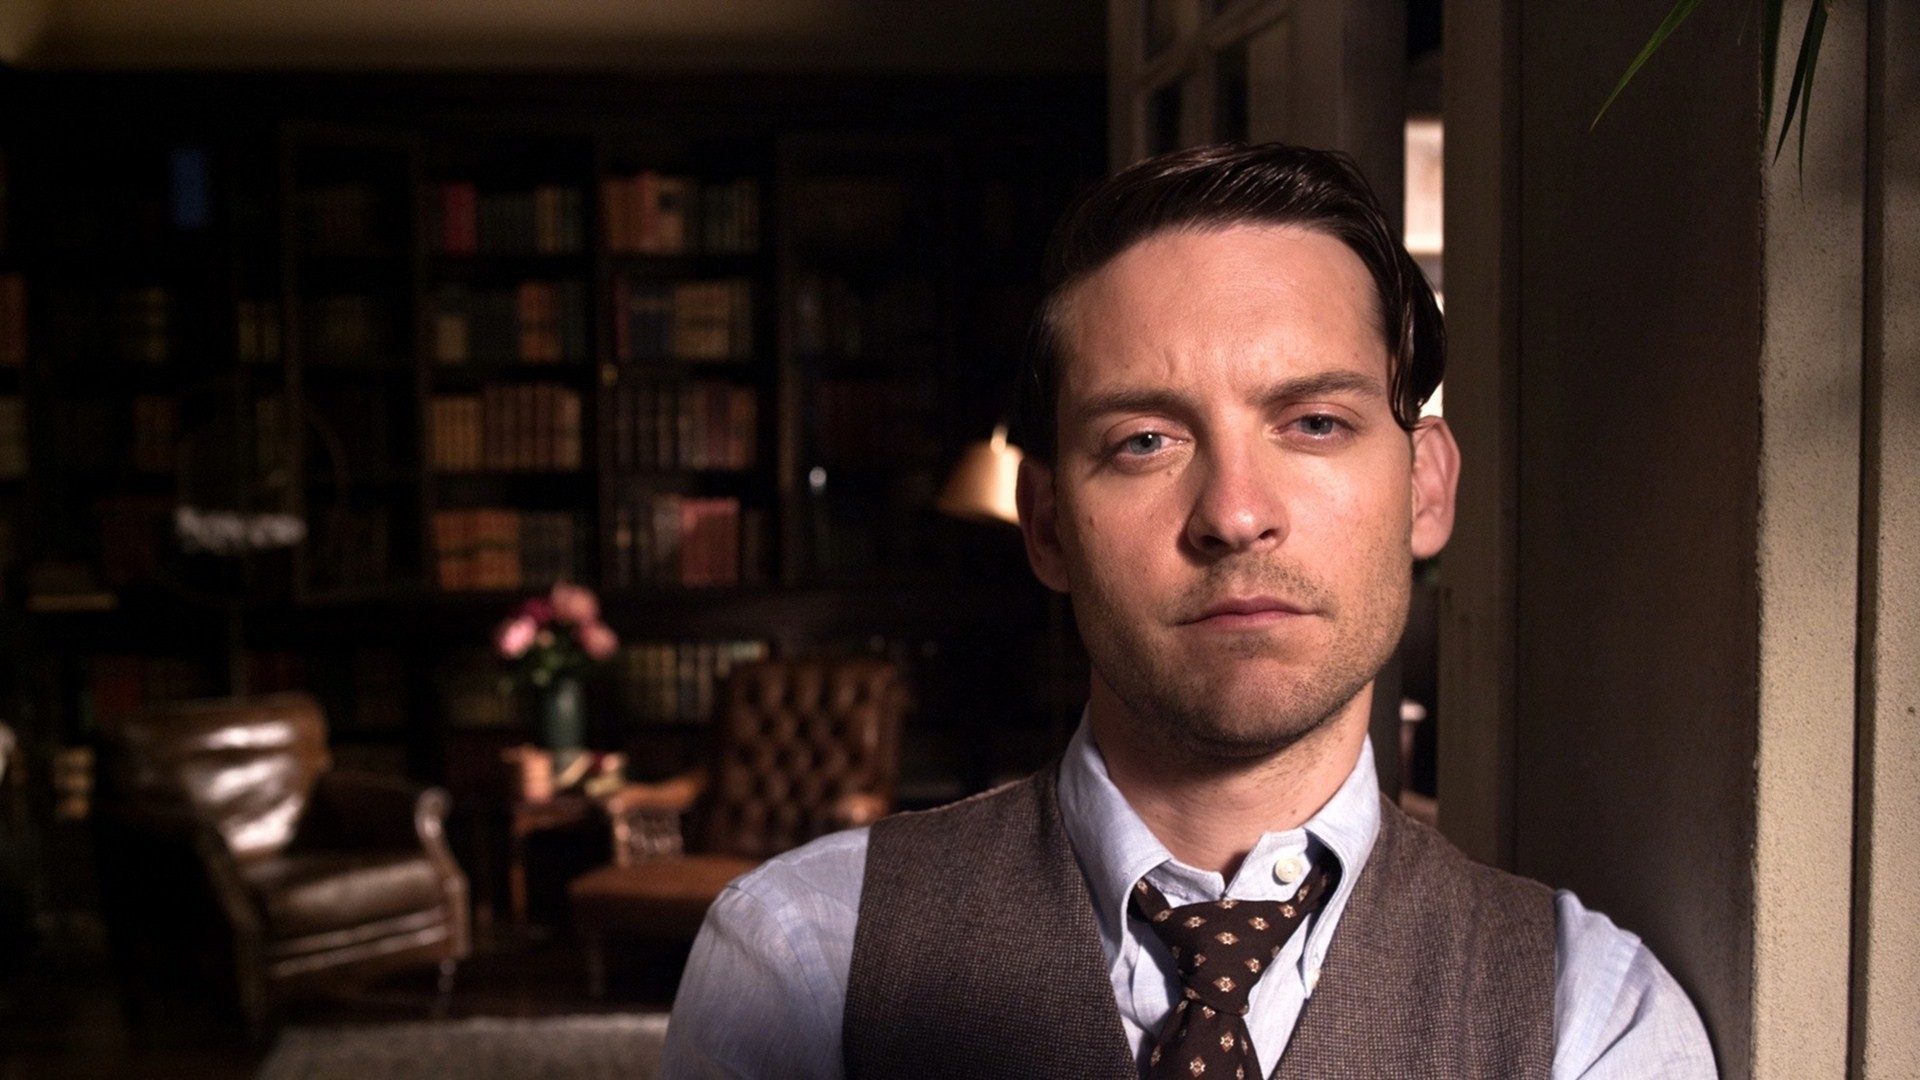 PAWN SACRIFICE Presents An Interesting Look Inside An Unusual Event